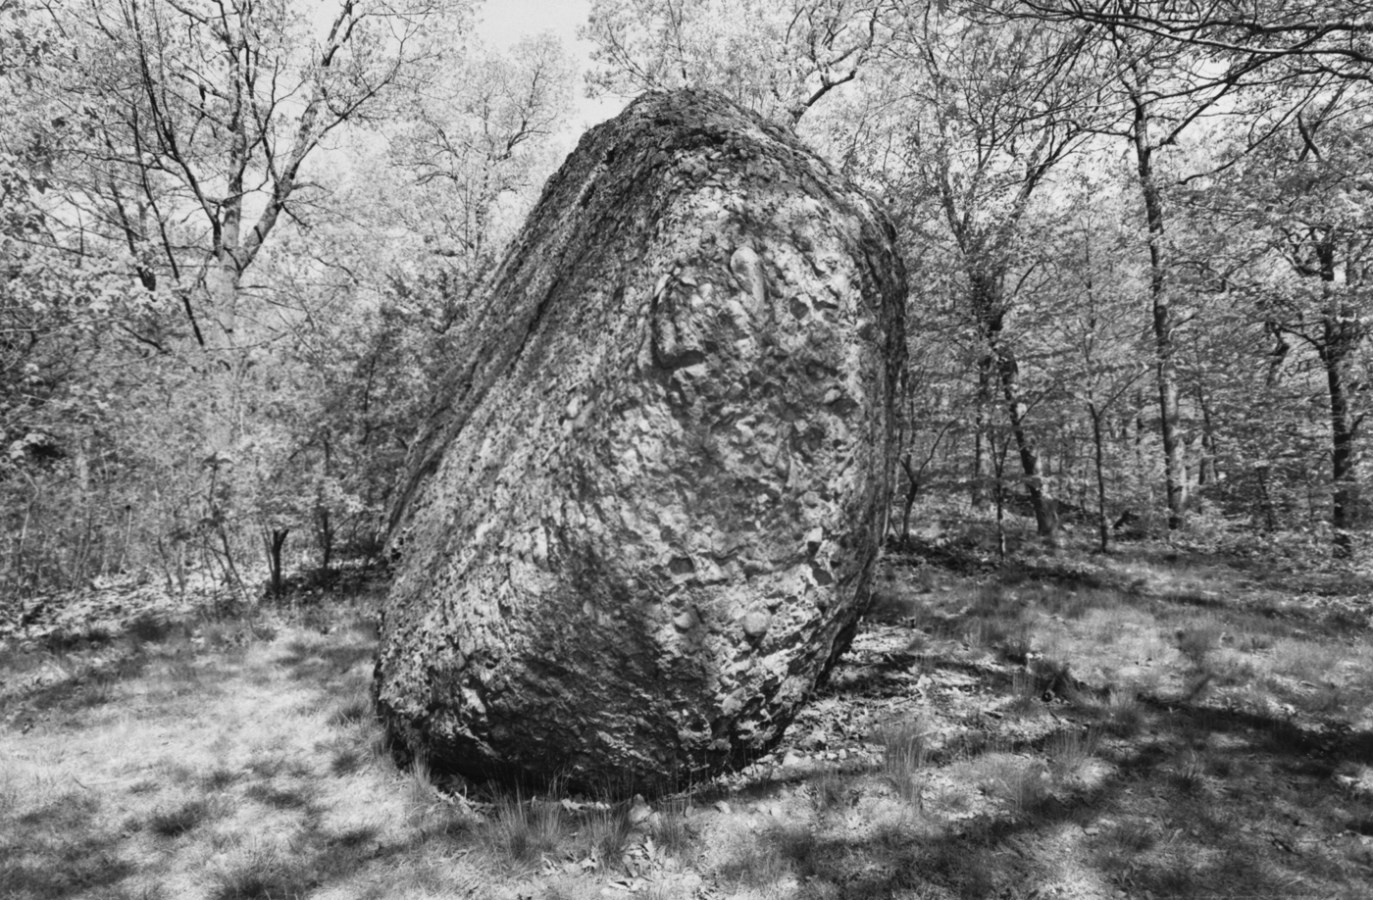 Black-and-white photograph of a large rock in a clearing surrounded by trees